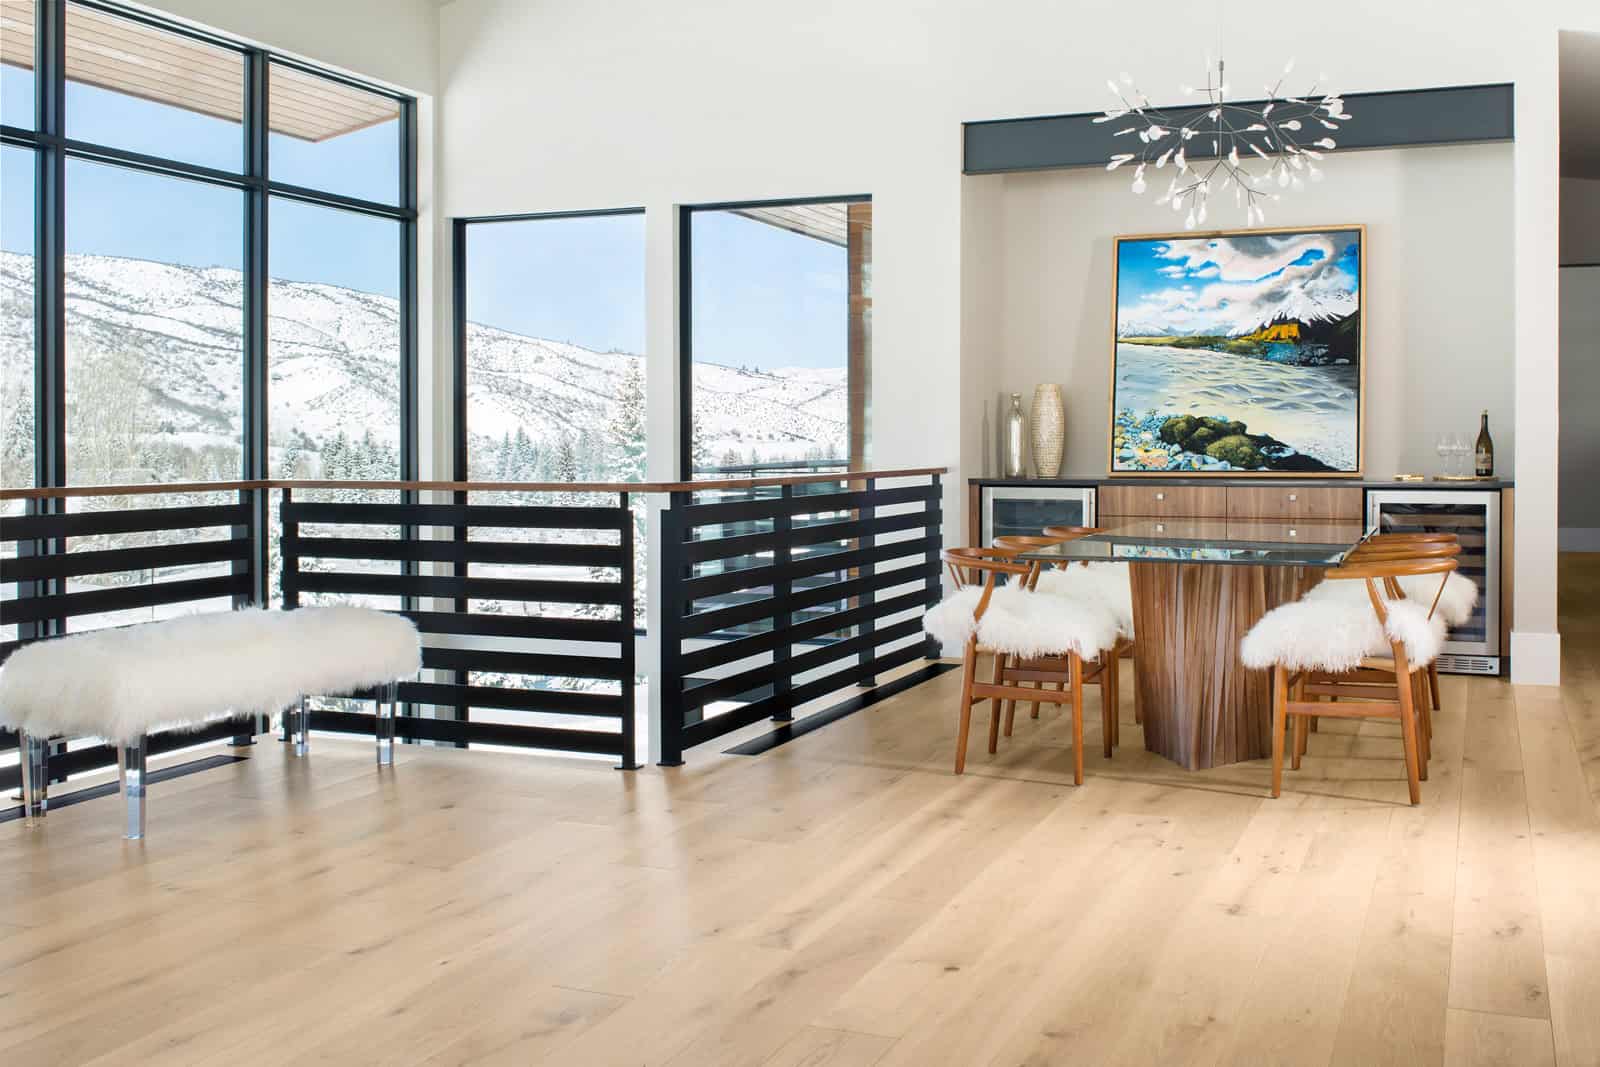 A dining room view from the Utopia in Lake Creek project.